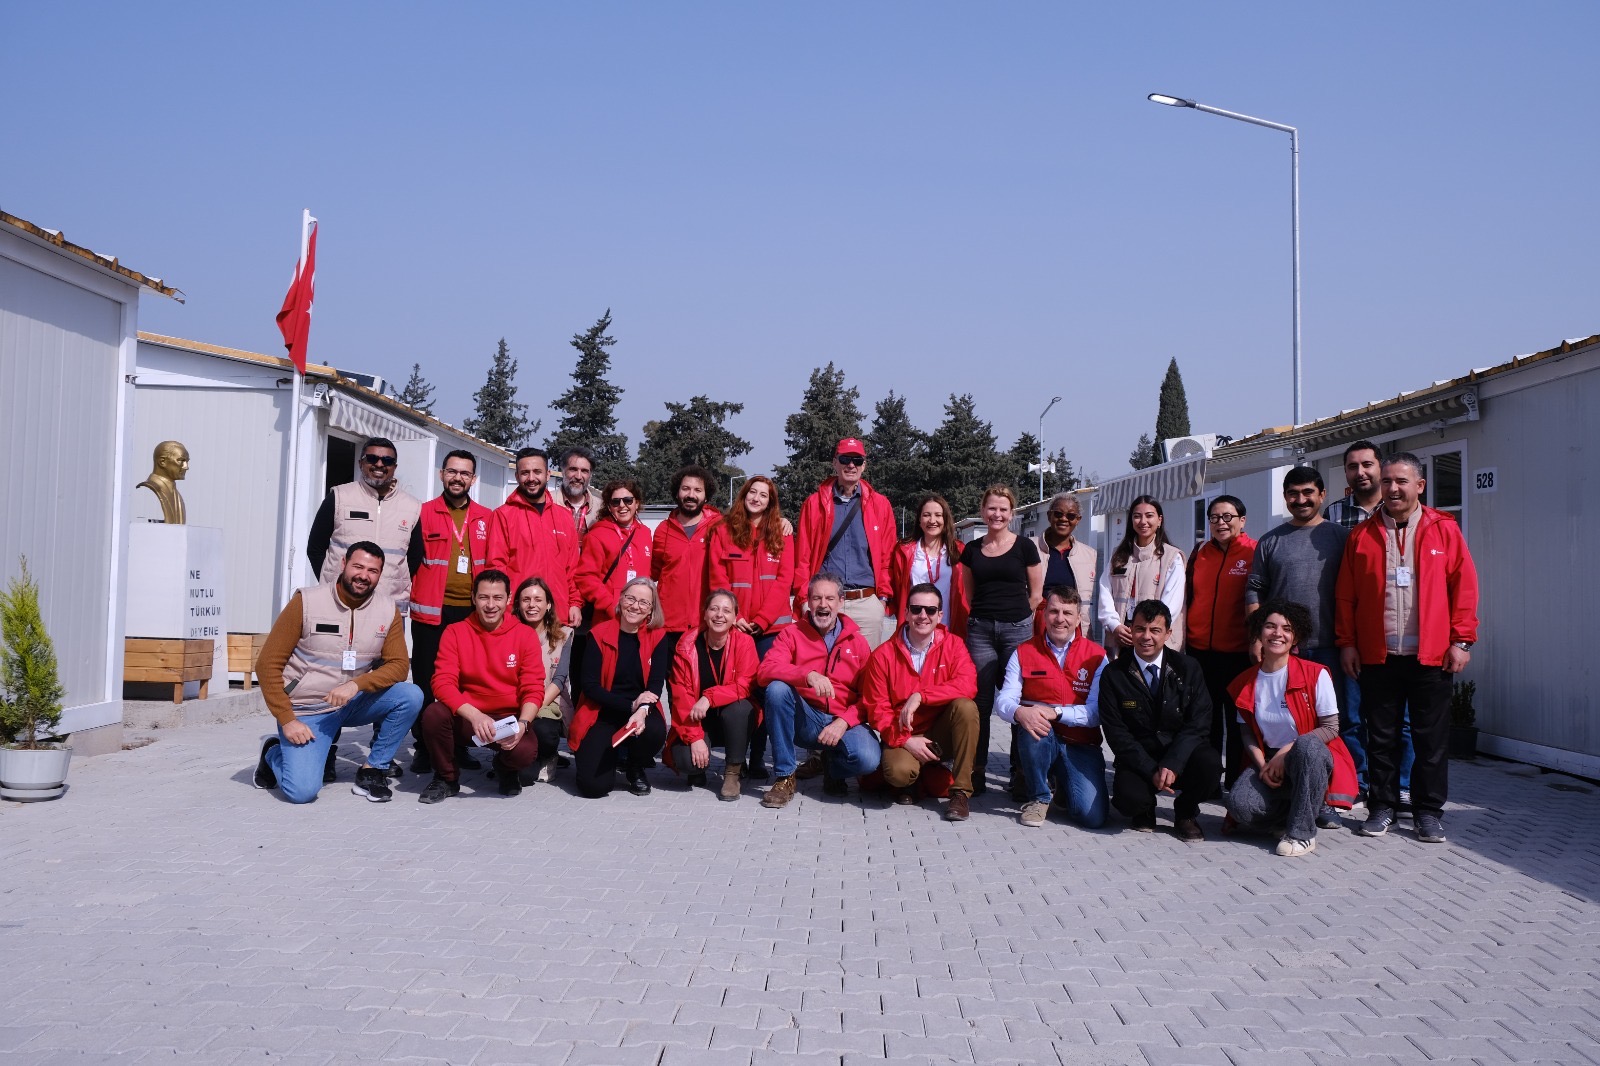 Danny (front row, fourth from right) with some of the Save the Children Türkiye team.